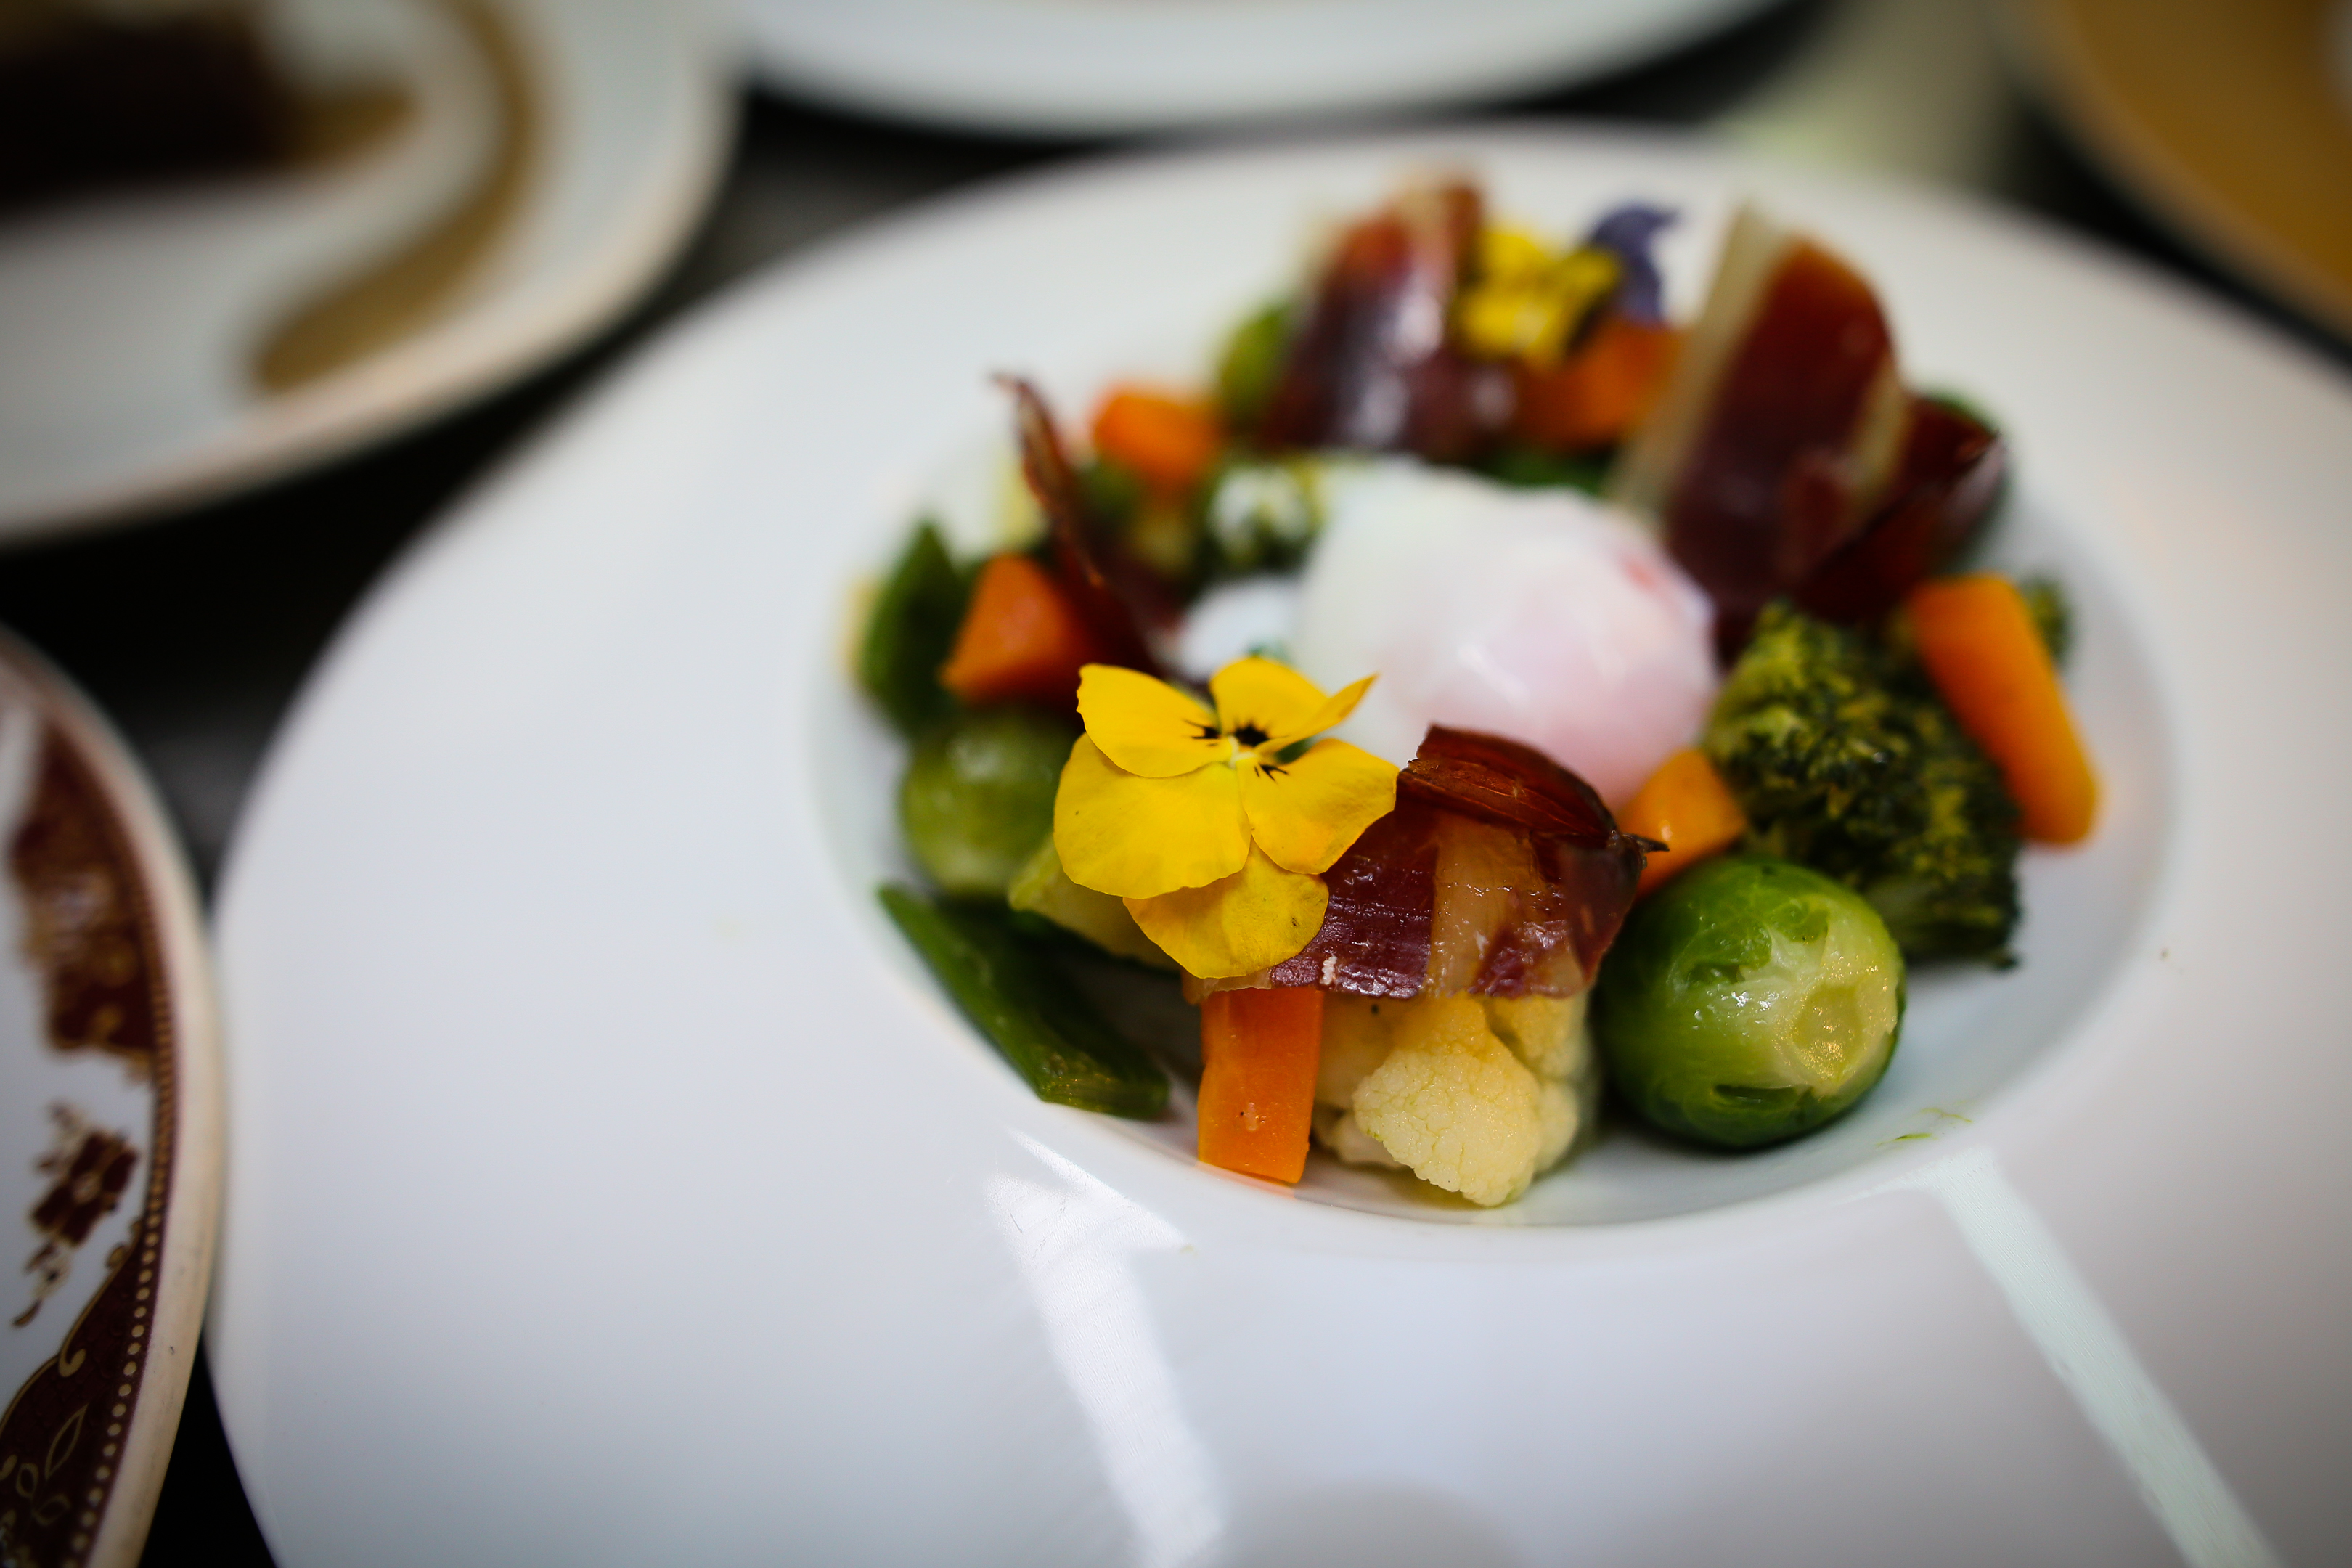 Sauteed vegetables with thermal egg and slices of Iberian ham